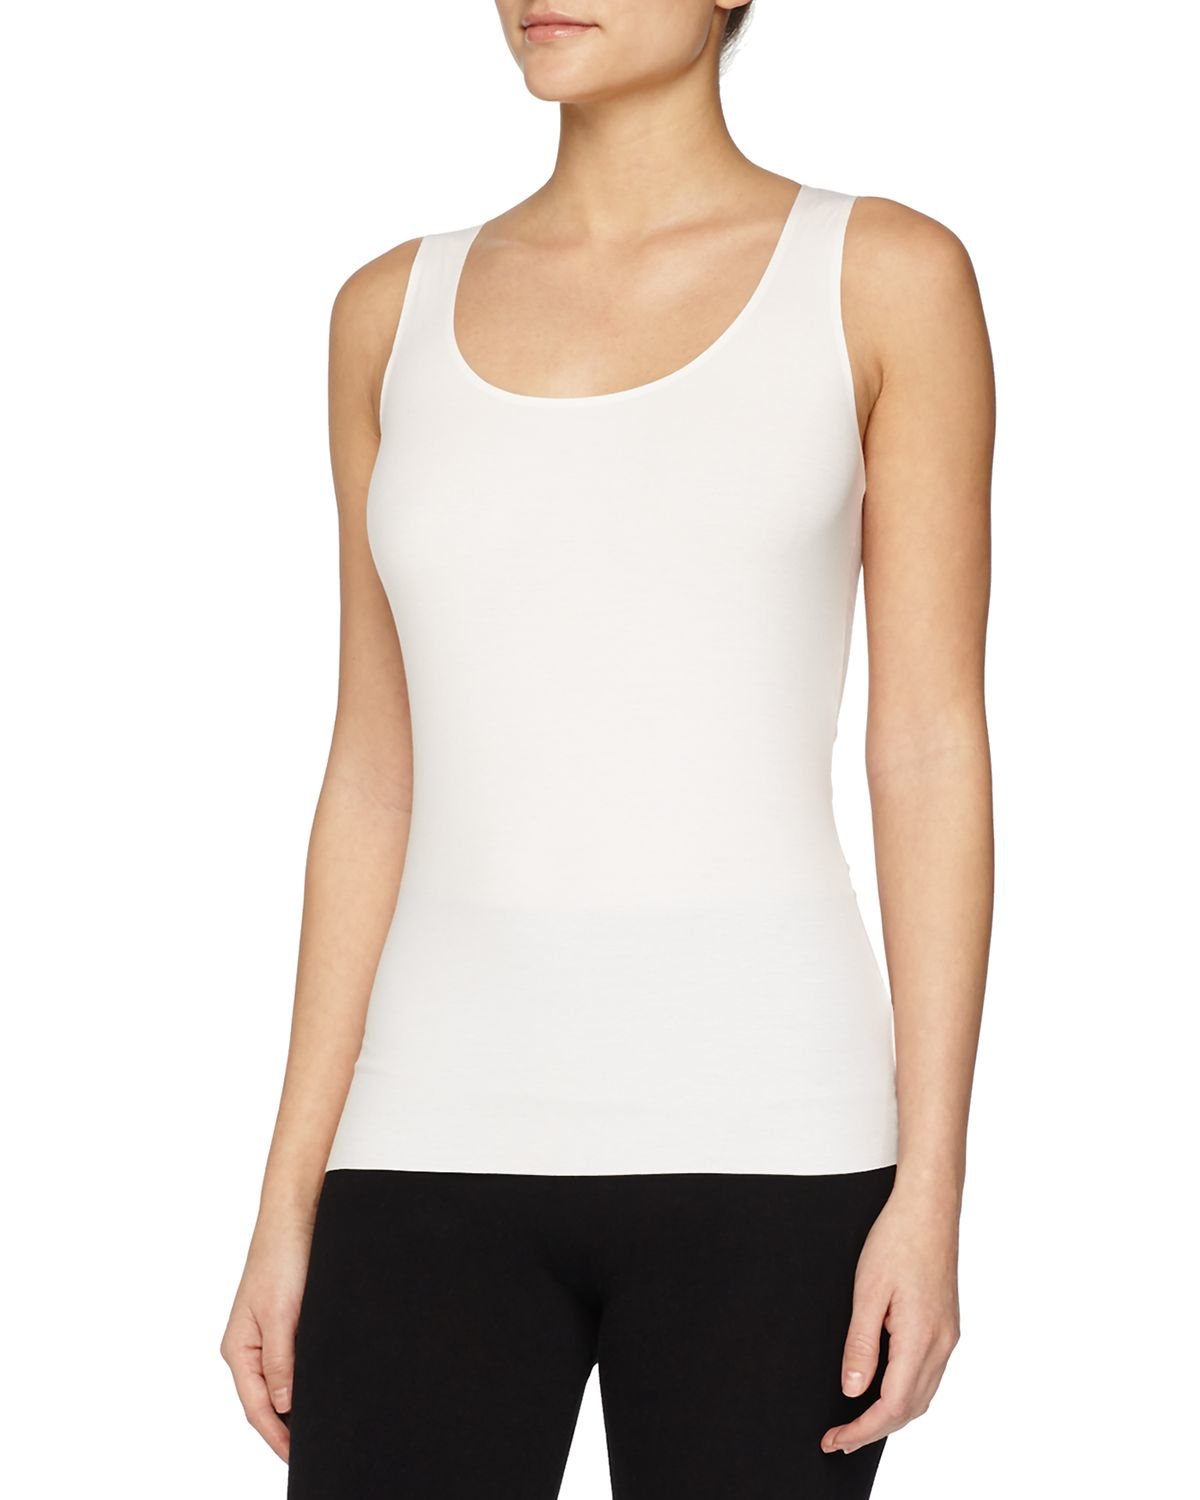 Lyst - Wolford Pure Seamless Tank Top in White